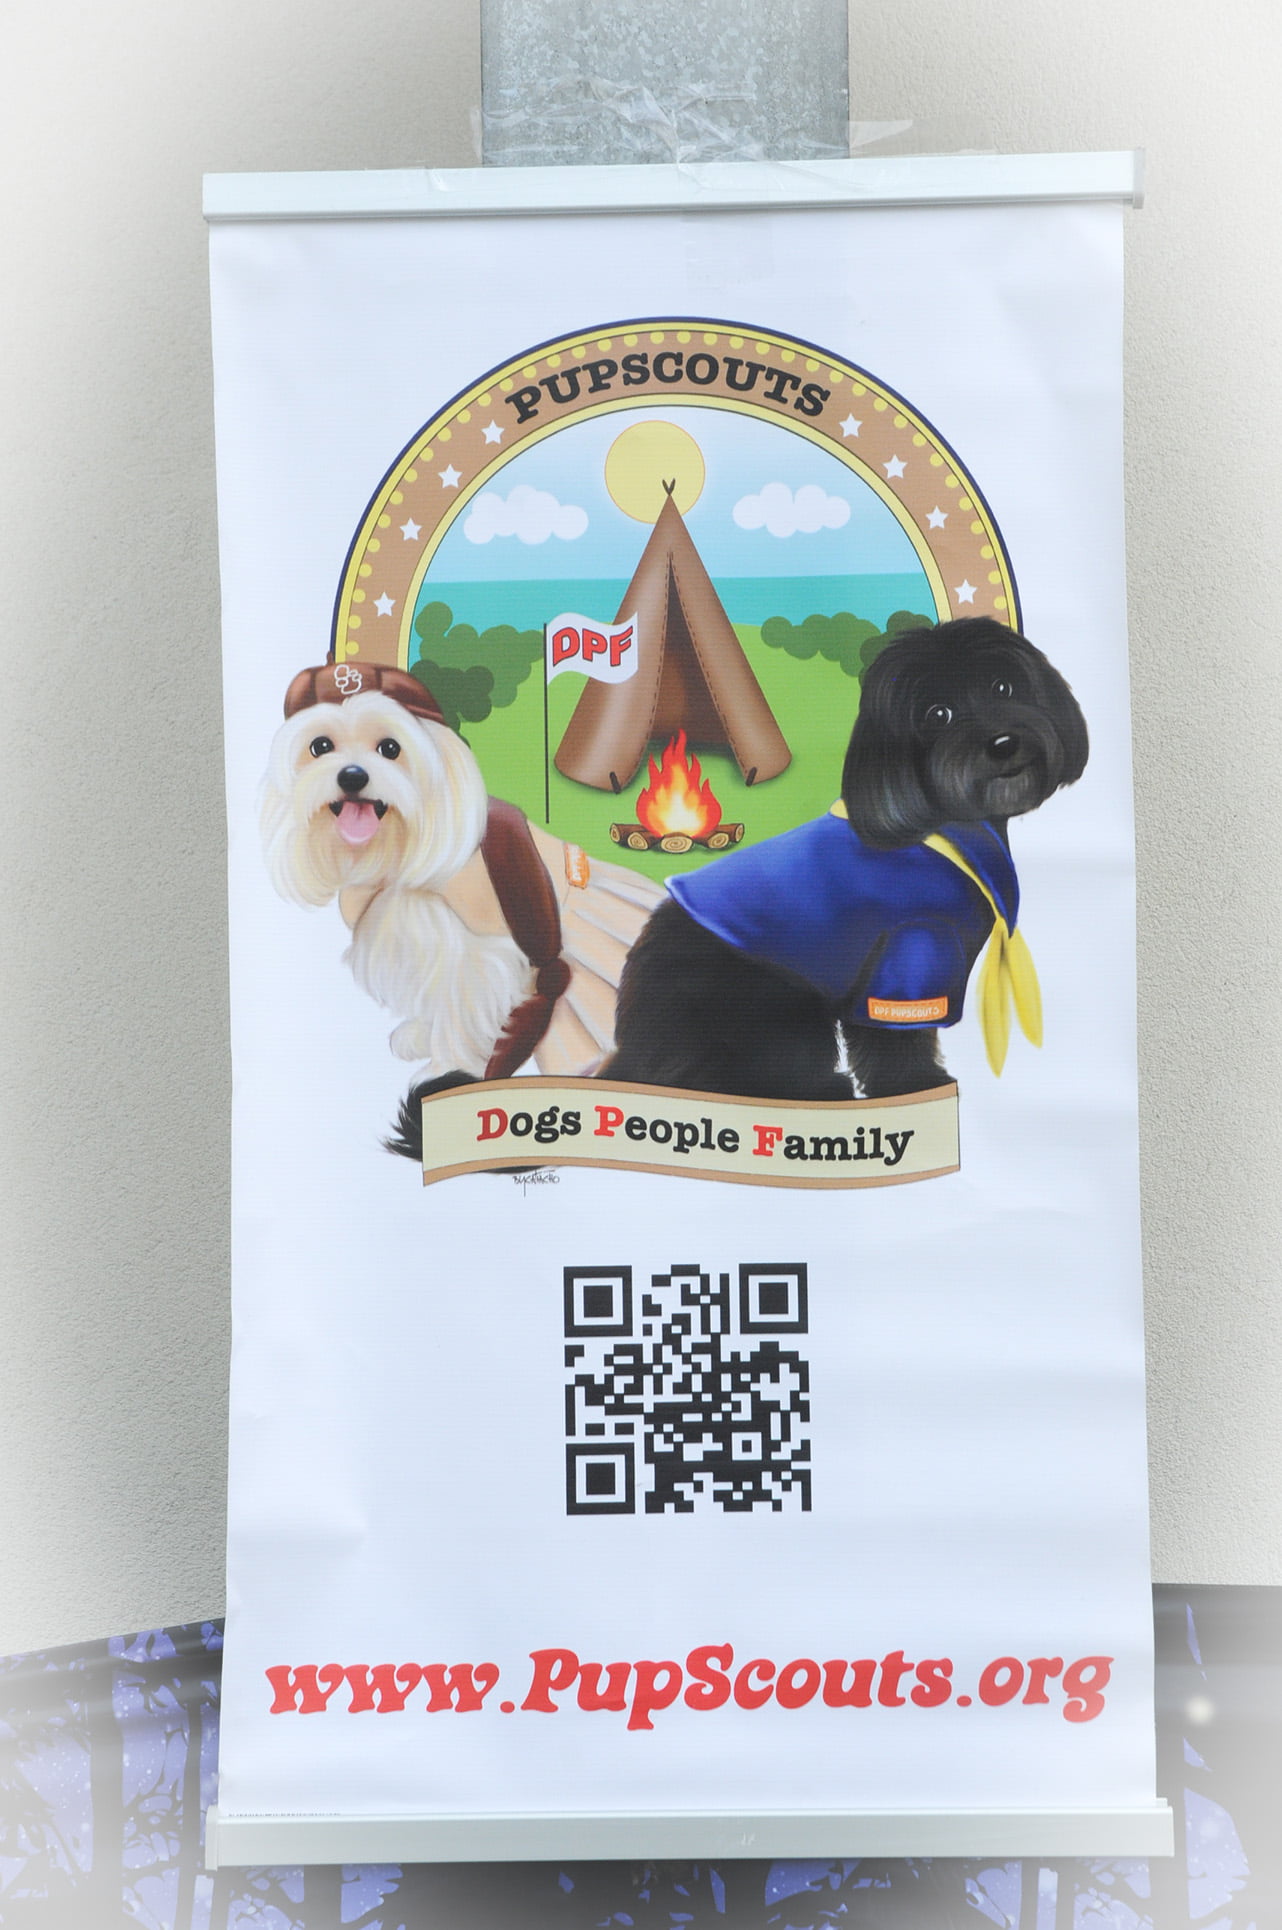 Come Camping with the Pup Scouts Page 3 | M&M Bedbug Inspectors